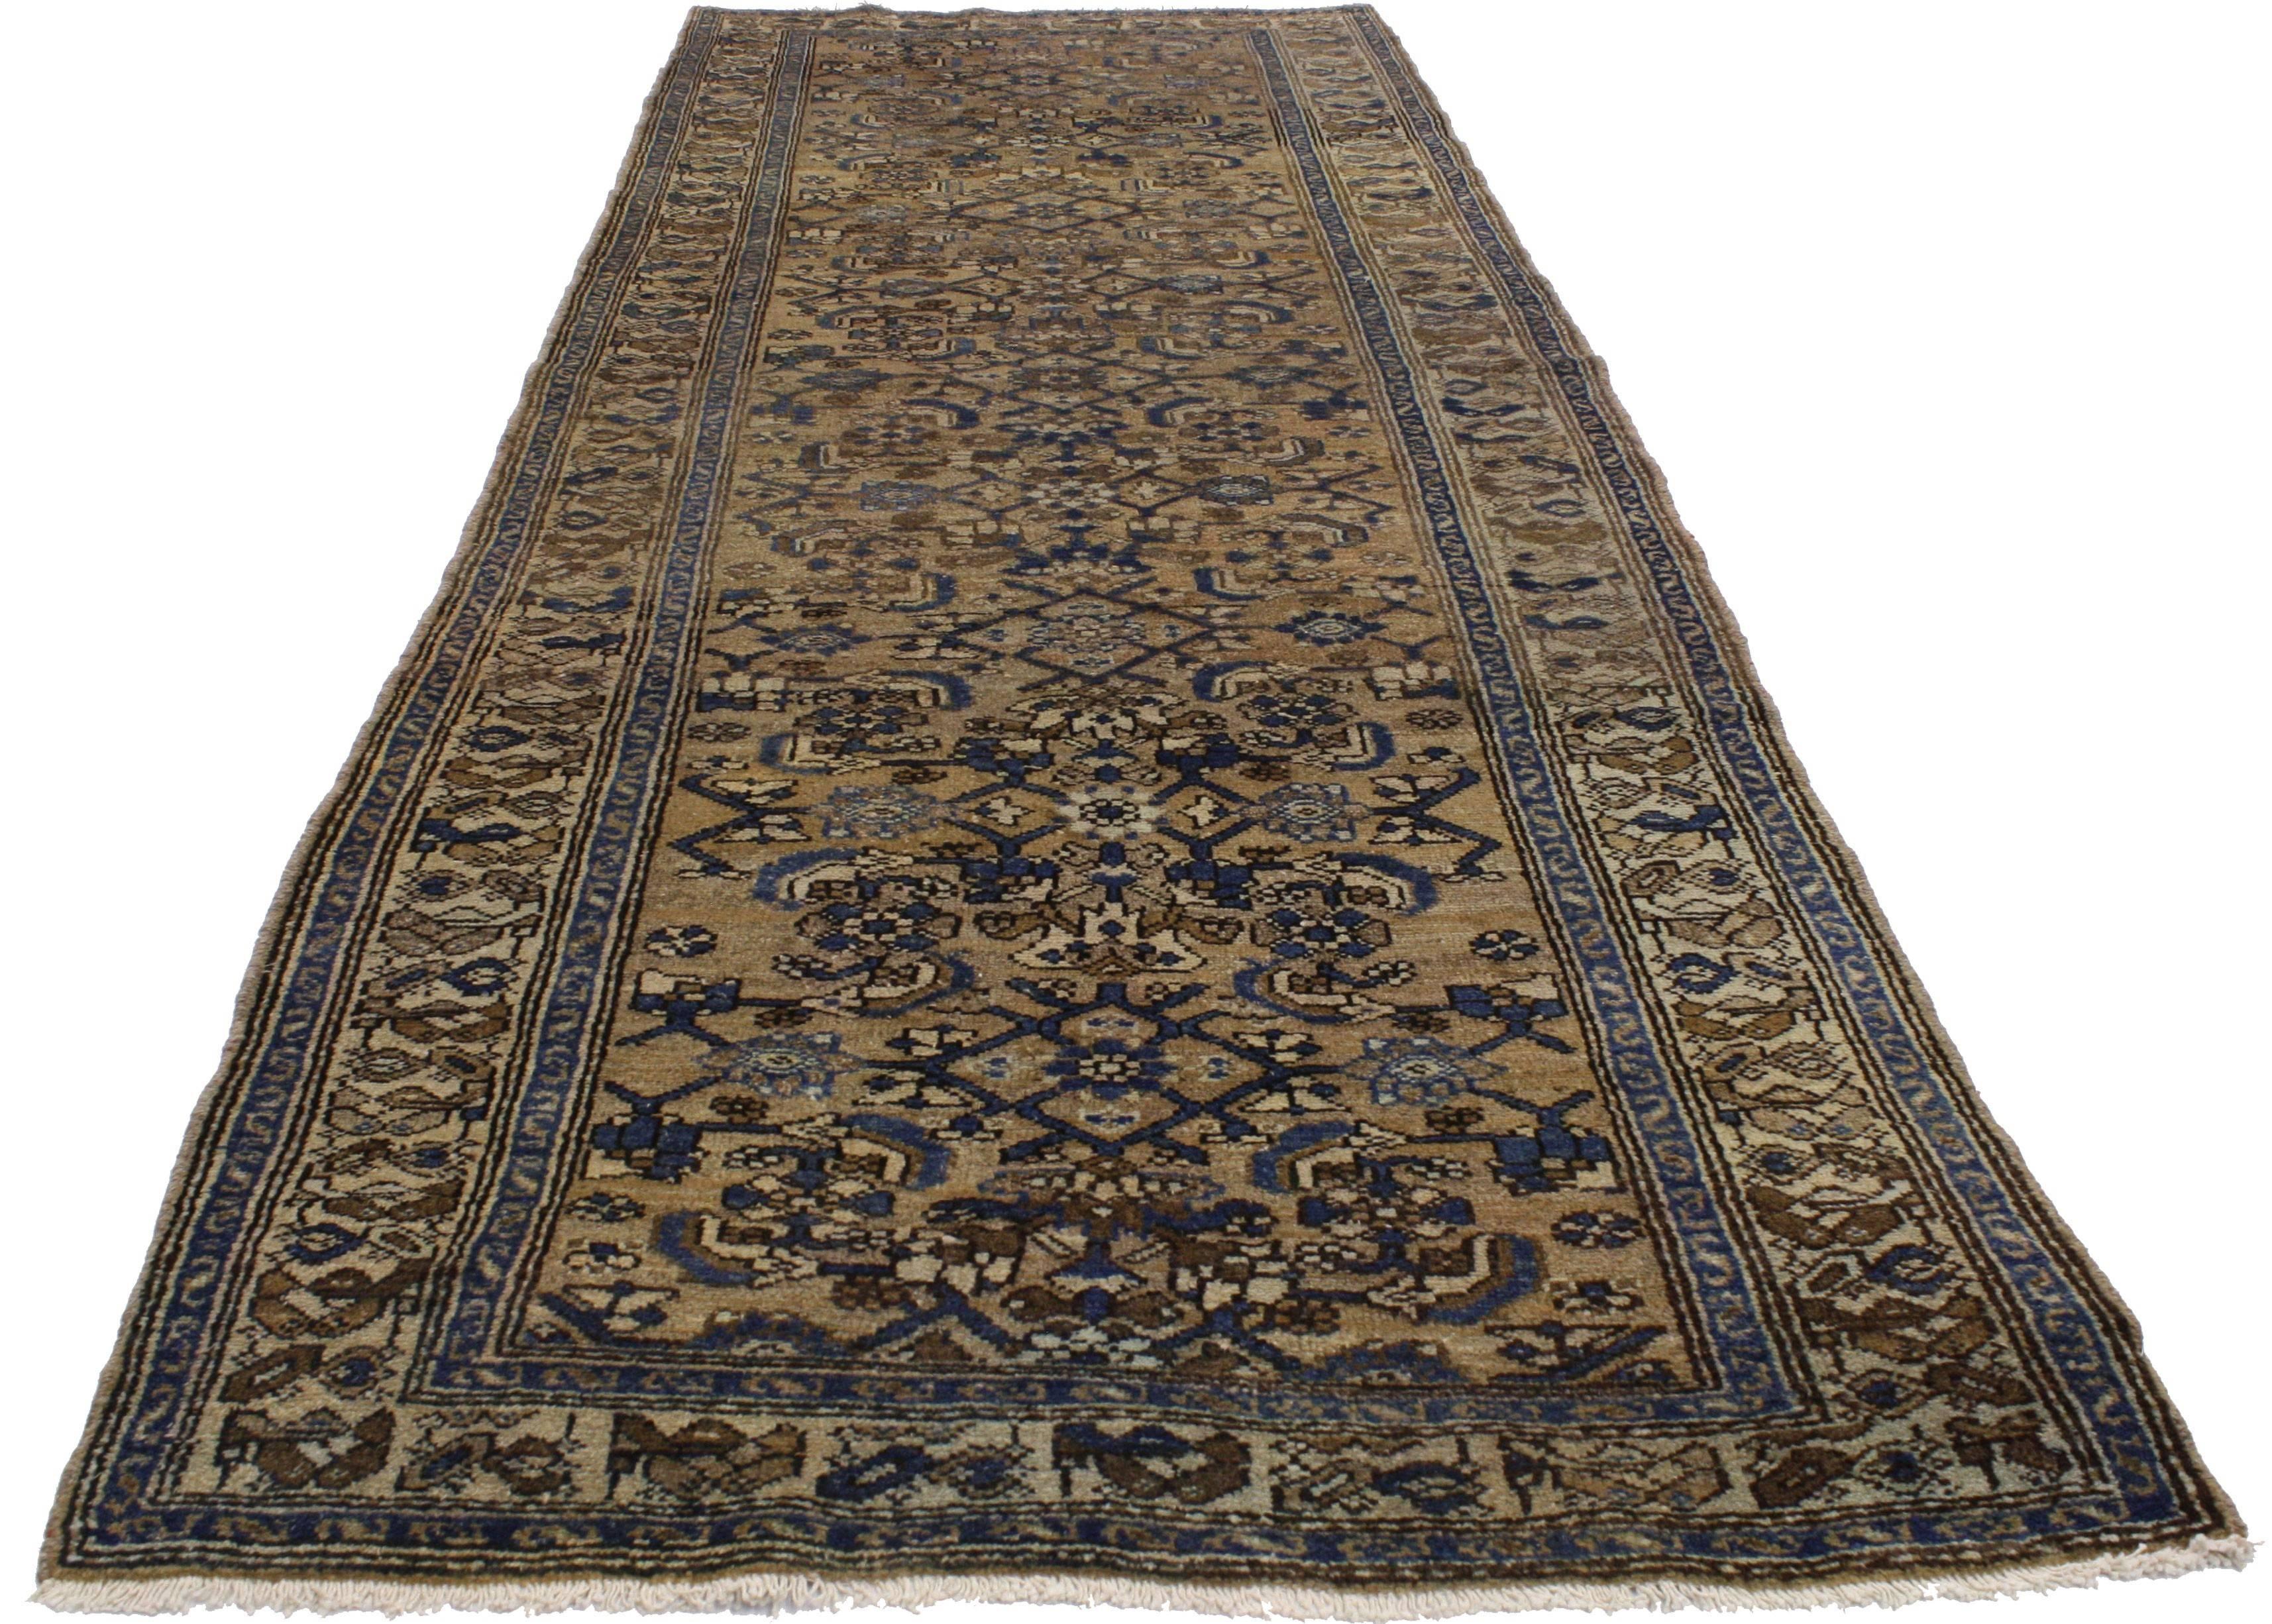 76561, antique Persian Herati Malayer runner, hallway runner. This hand-knotted wool antique Persian Malayer runner features an all-over Herati pattern on a warm, brown abrashed field. It is enclosed with a complementary beige border flanked with